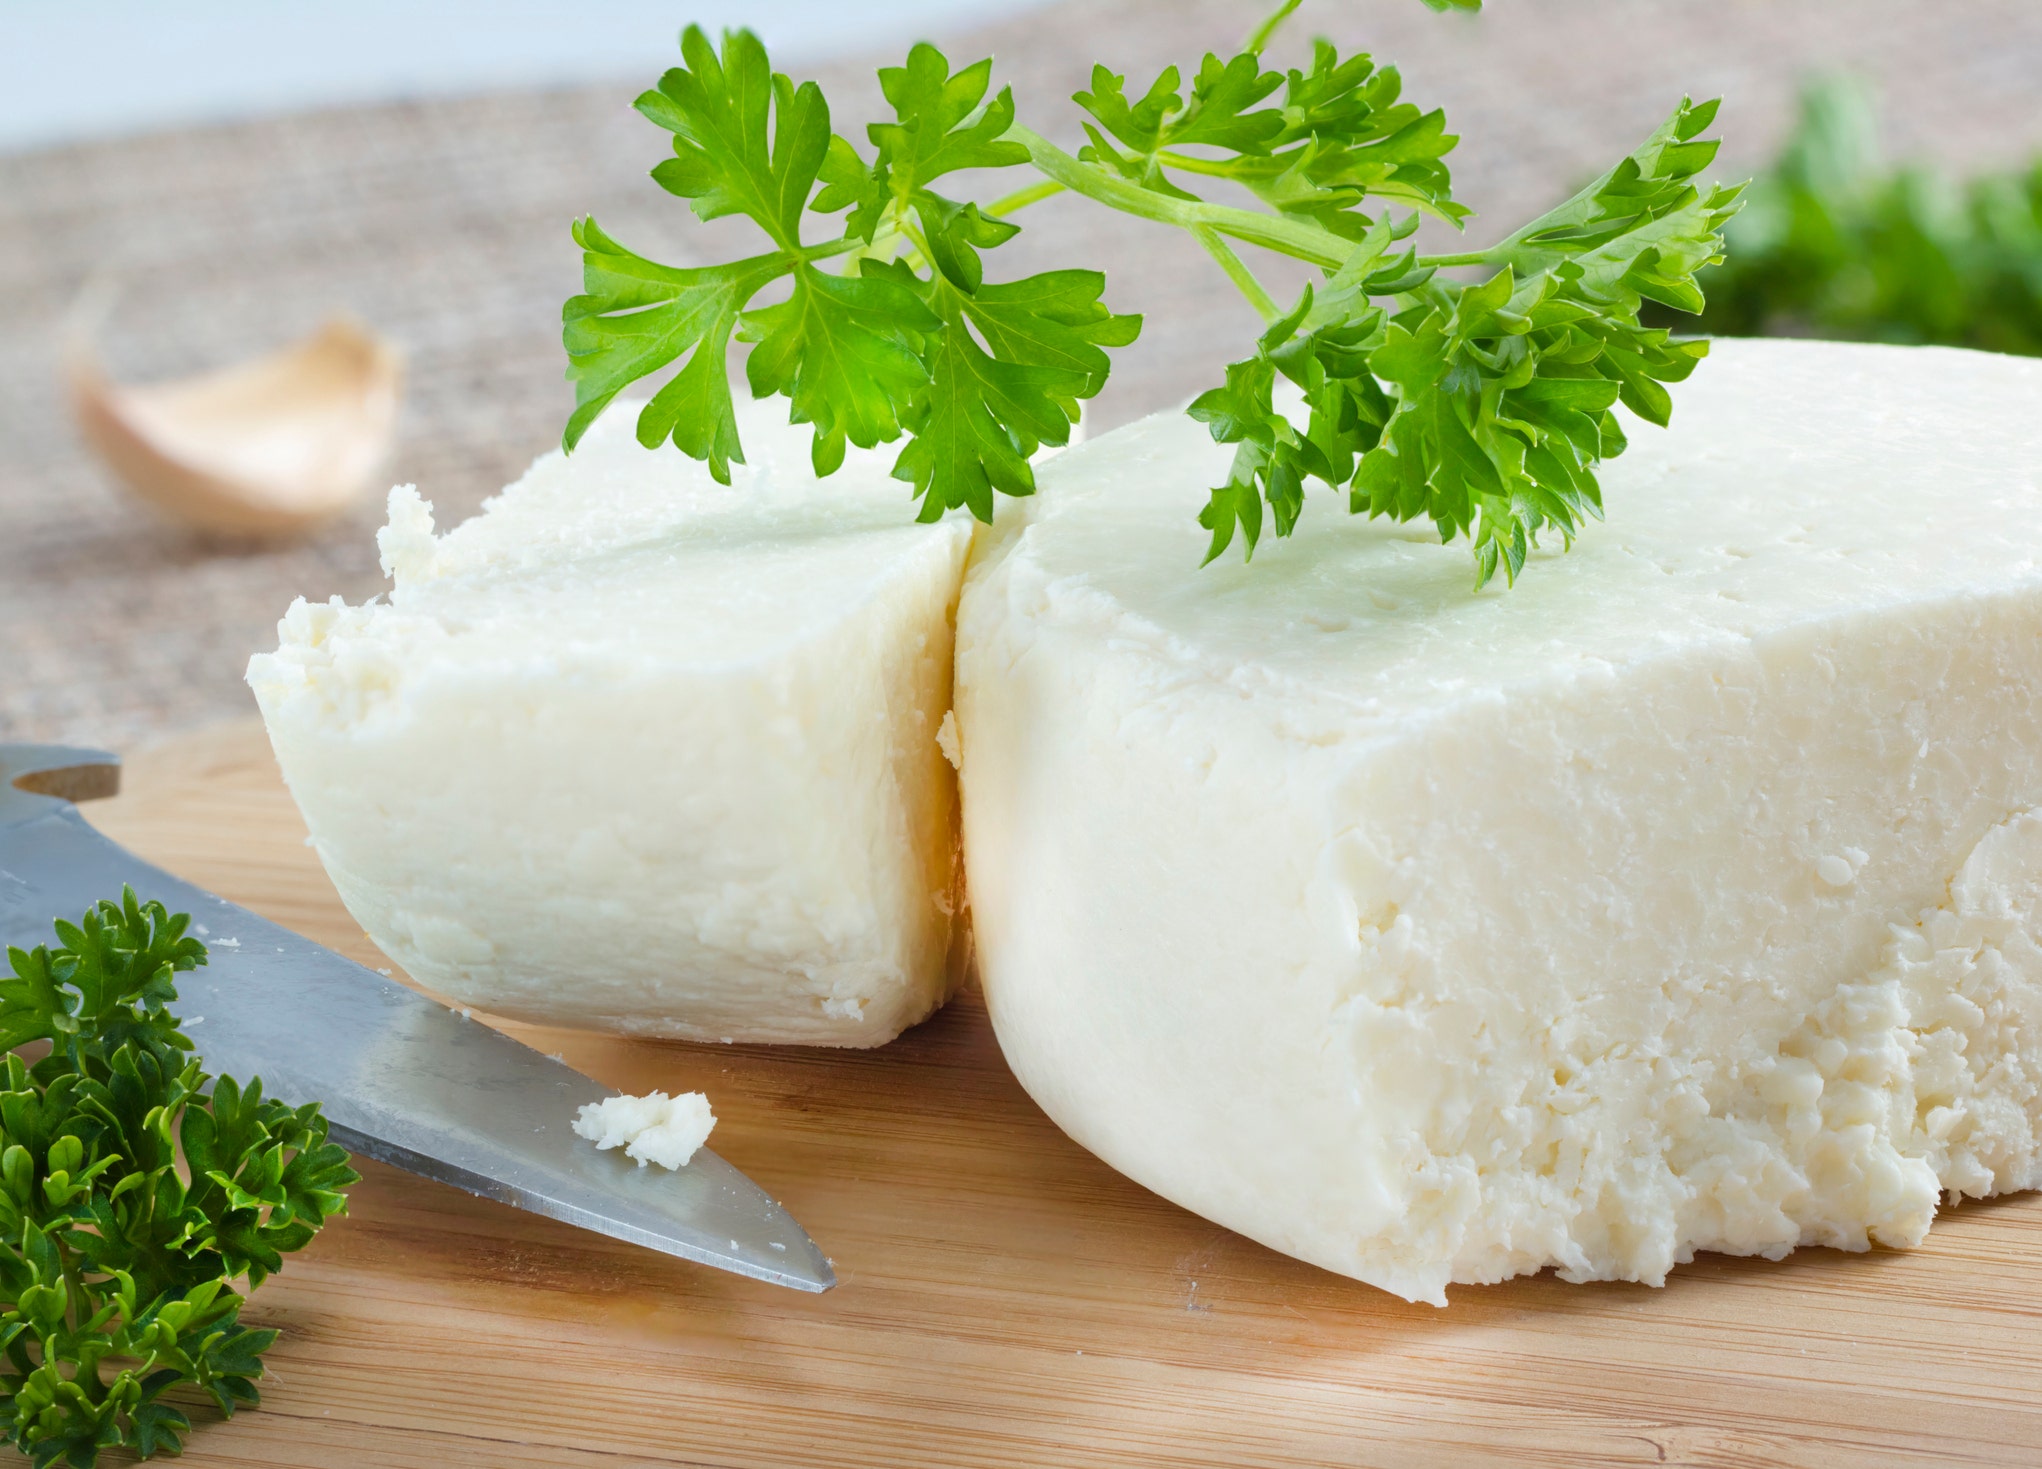 CDC warns Hispanic-style fresh, soft cheeses linked to listeria outbreak